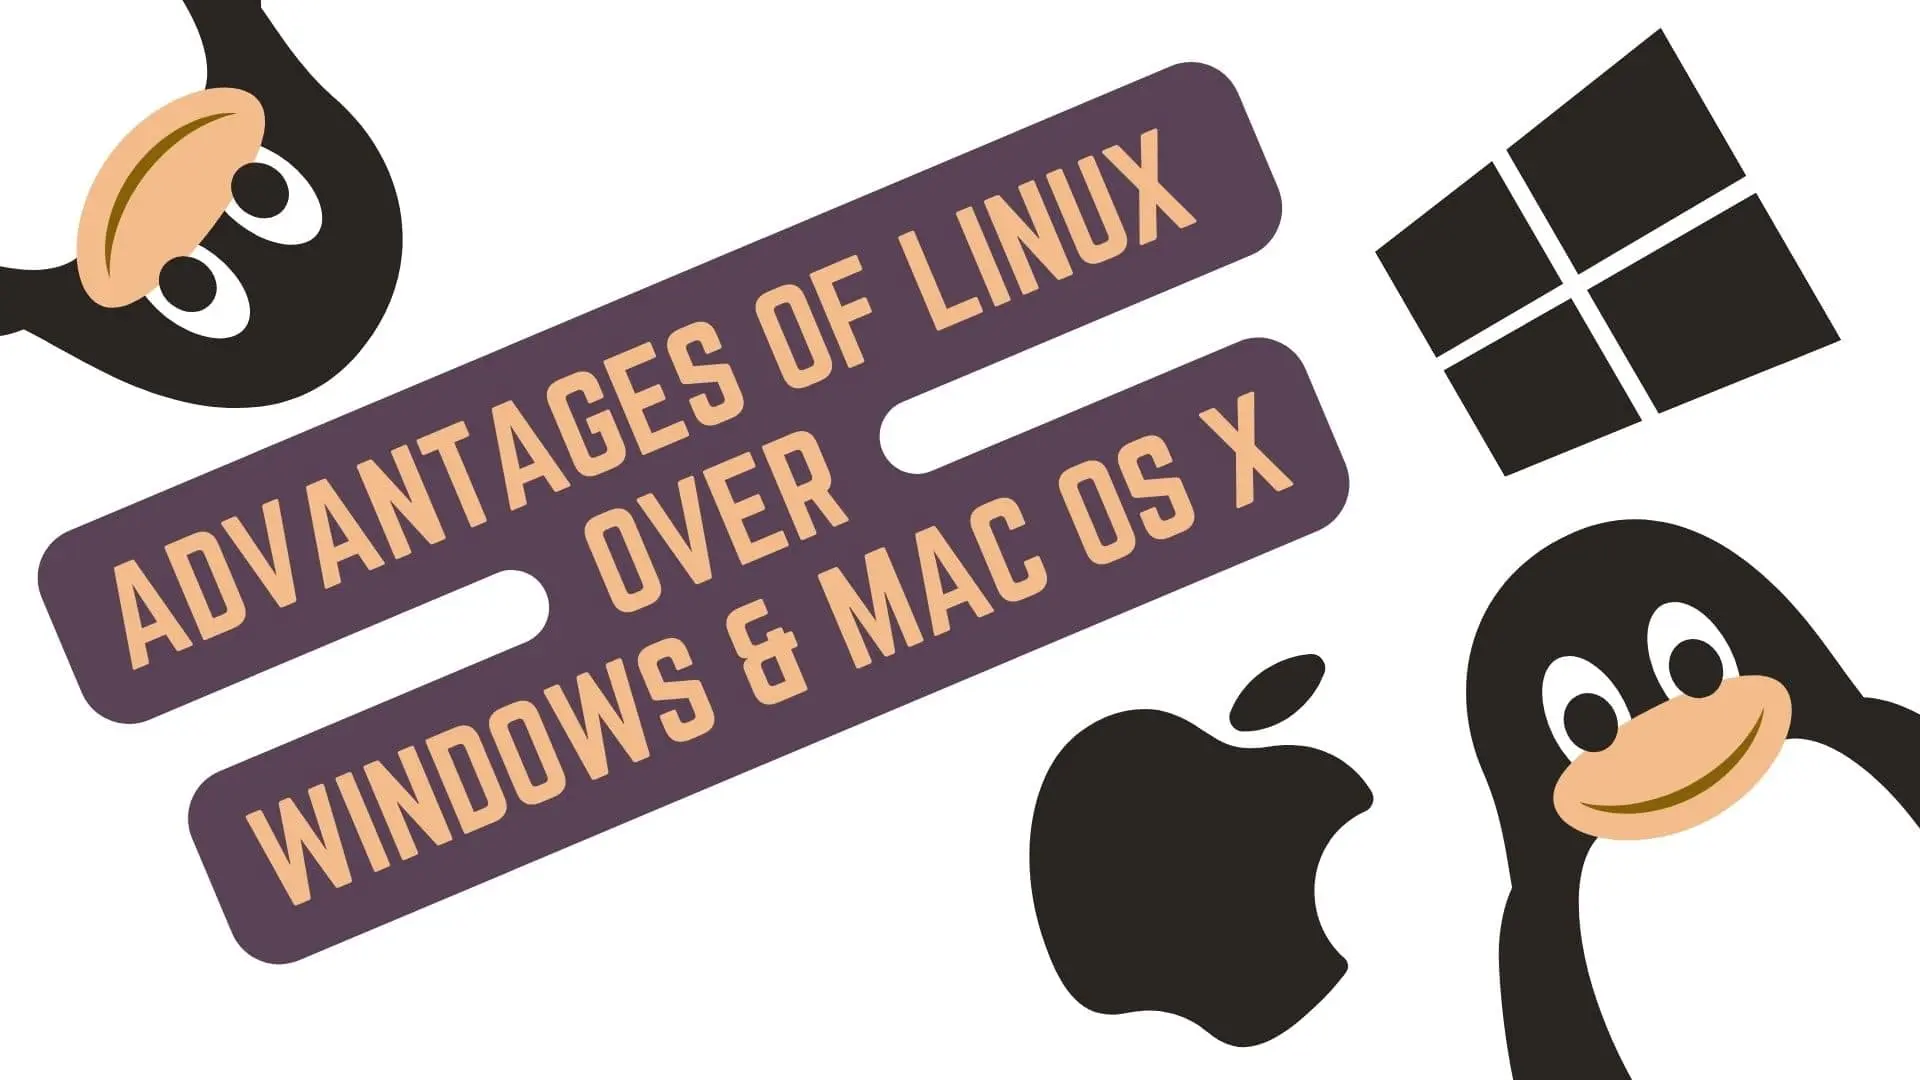 6 Advantages of Linux Over Windows and Mac OS X - Operating System Basics